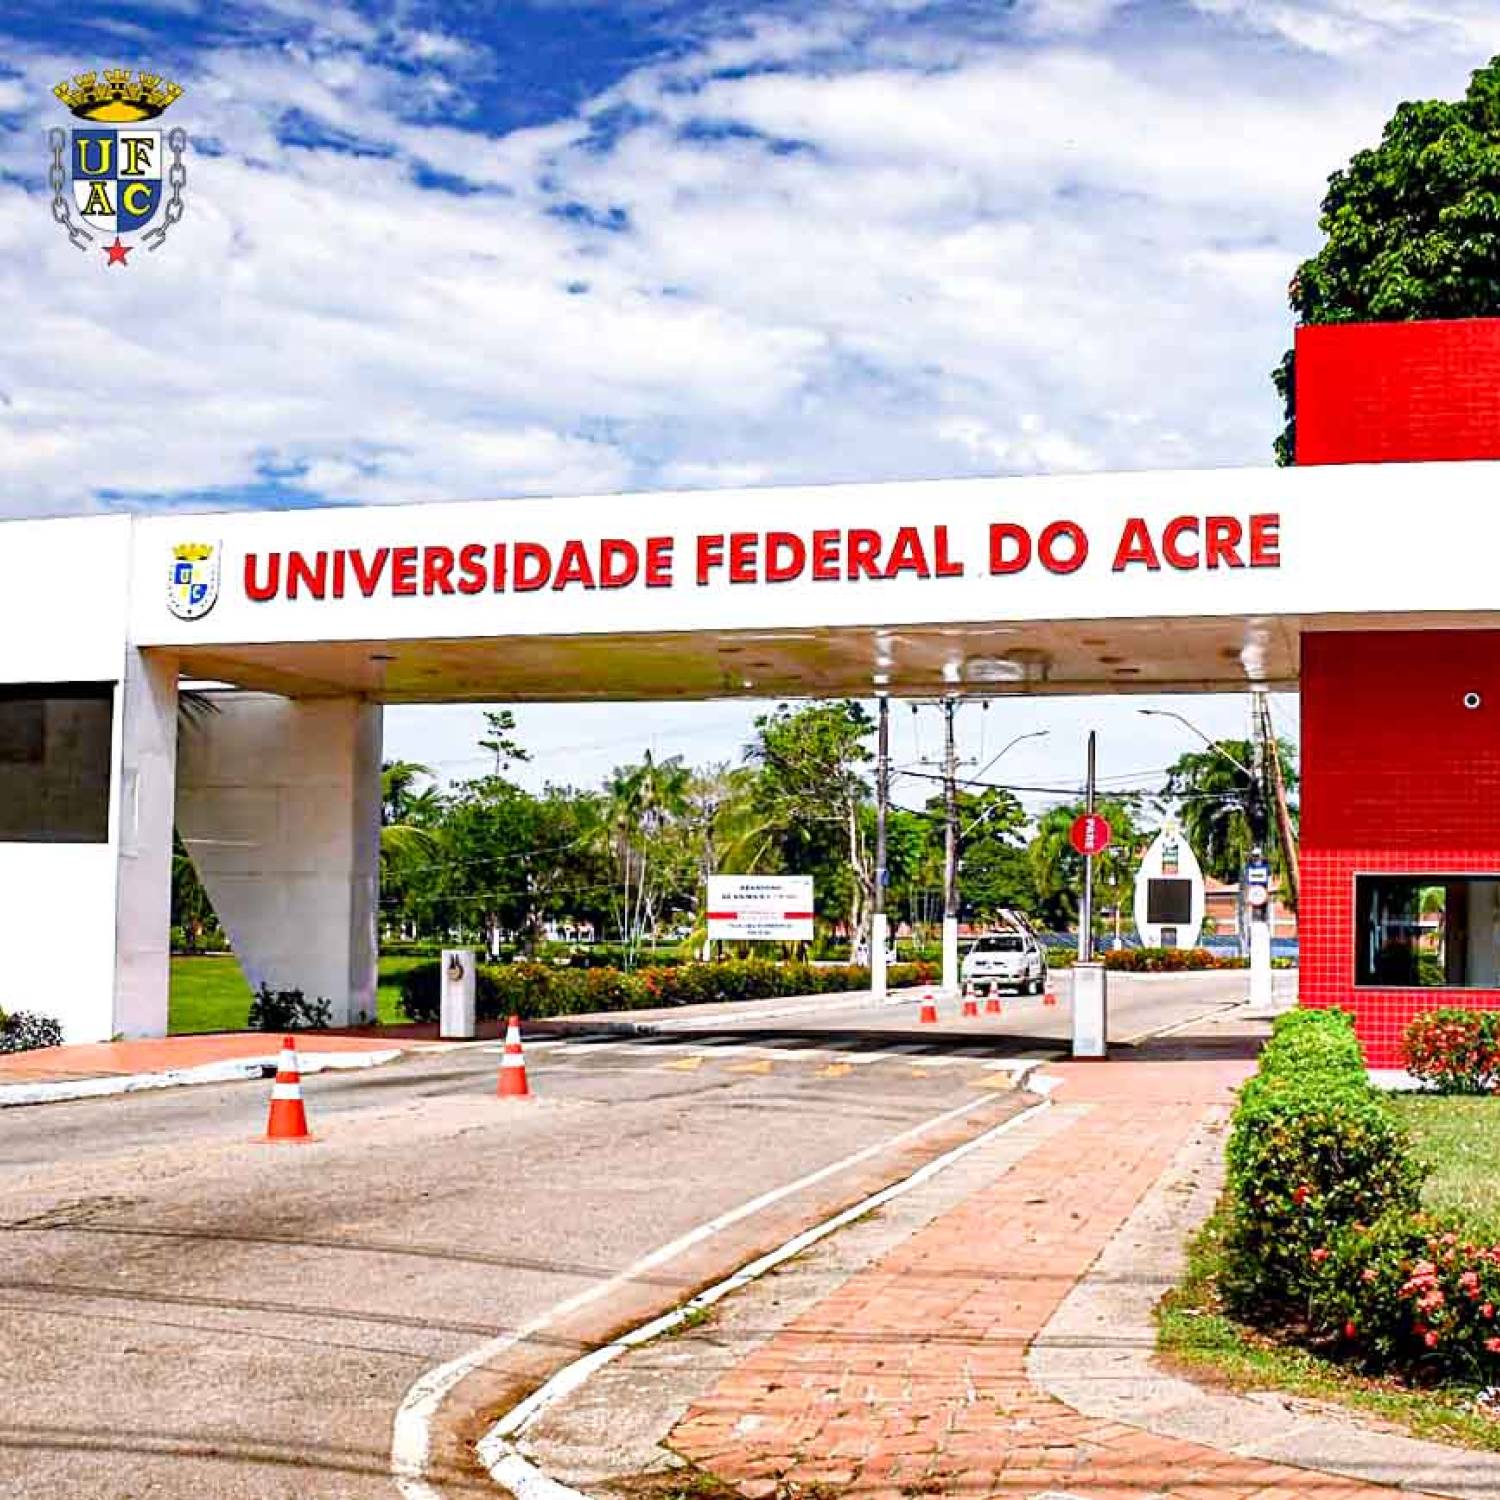 UNTRM and Universidade Federal Do ACRE (UFAC, Brazil) signed an academic agreement to promote and implement technical, scientific, and cultural cooperation programs